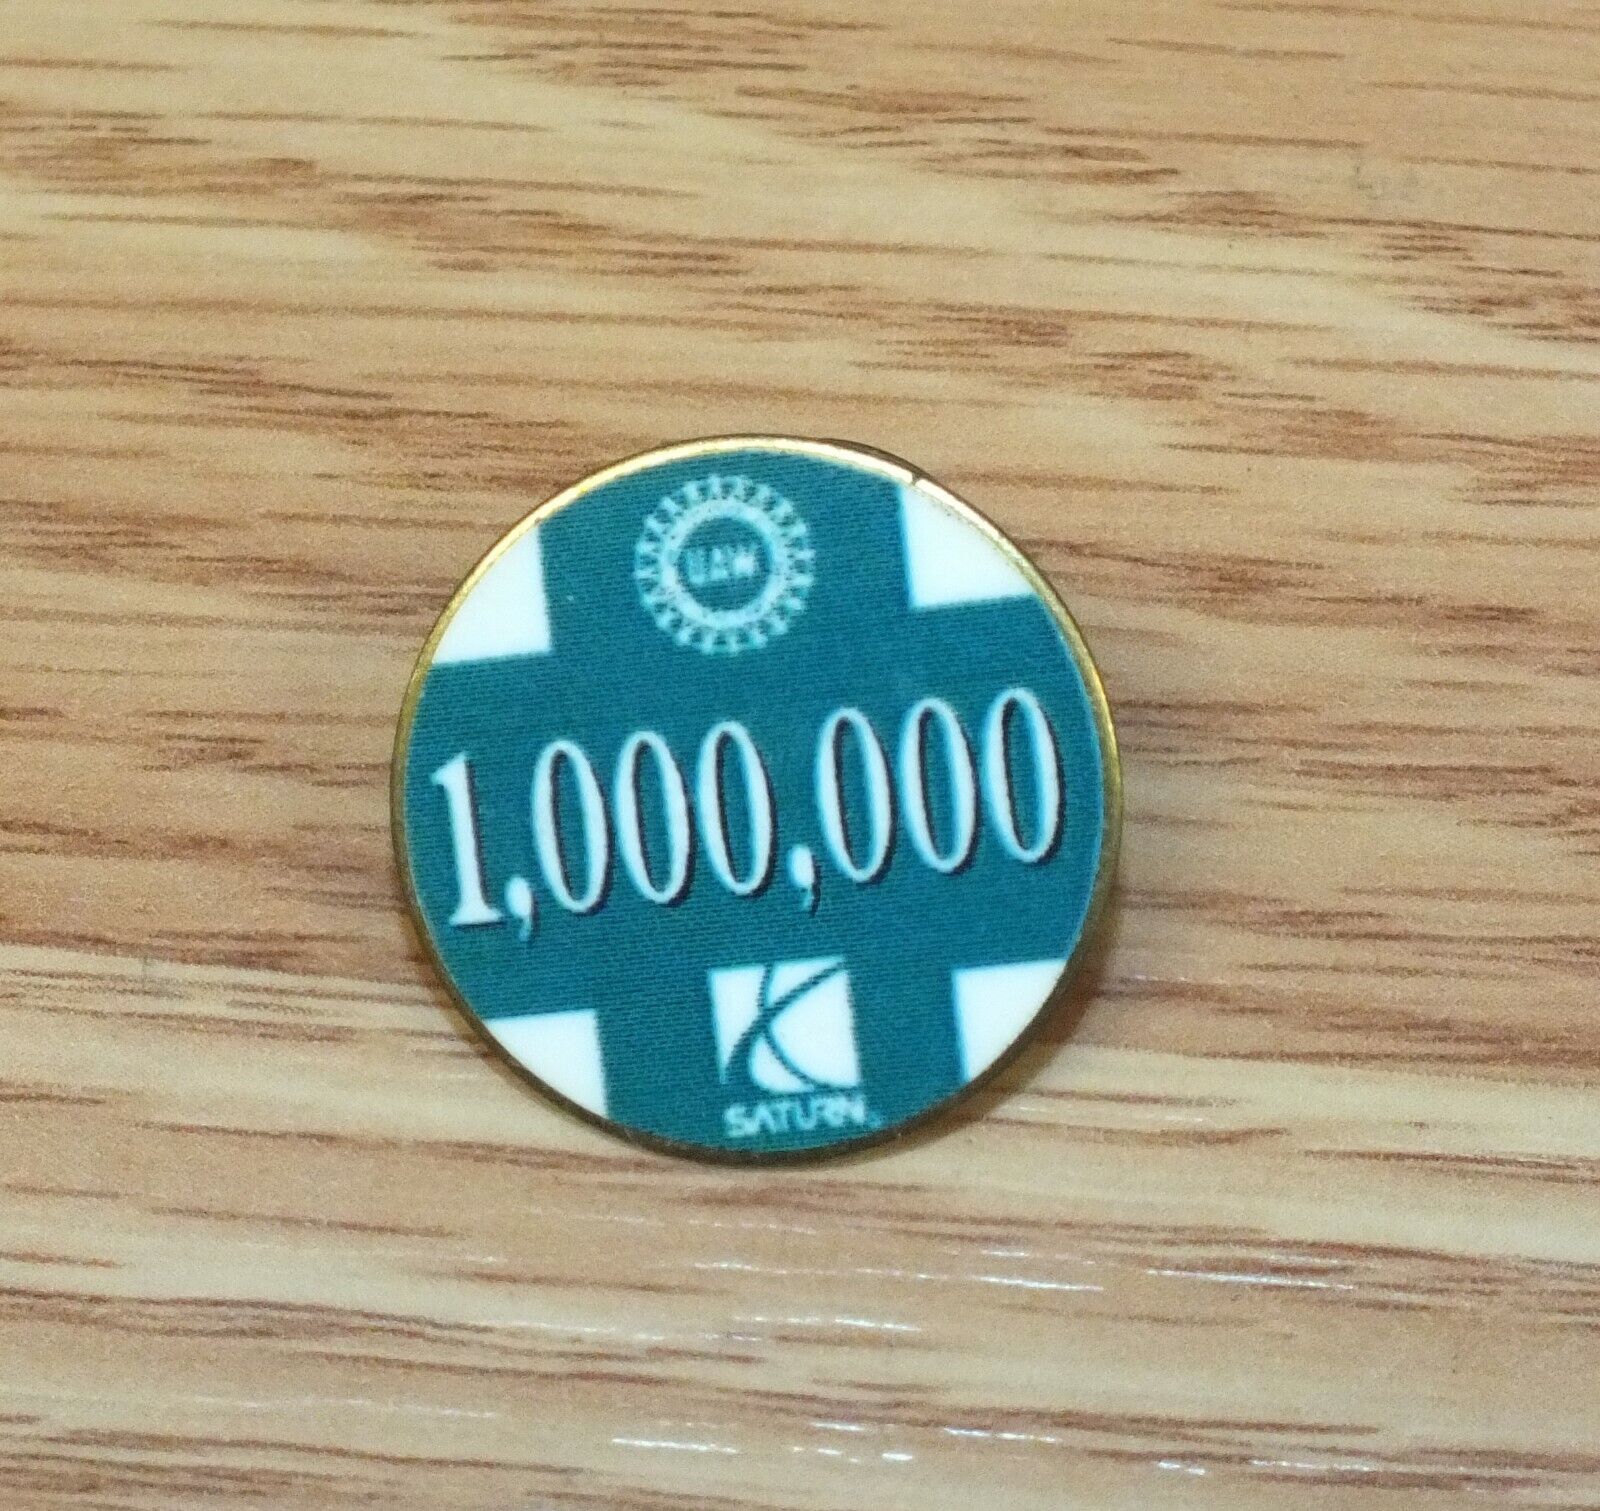 Green & White 1,000,000 UAW Collectible Saturn Employee Advertisement Lapel Pin 